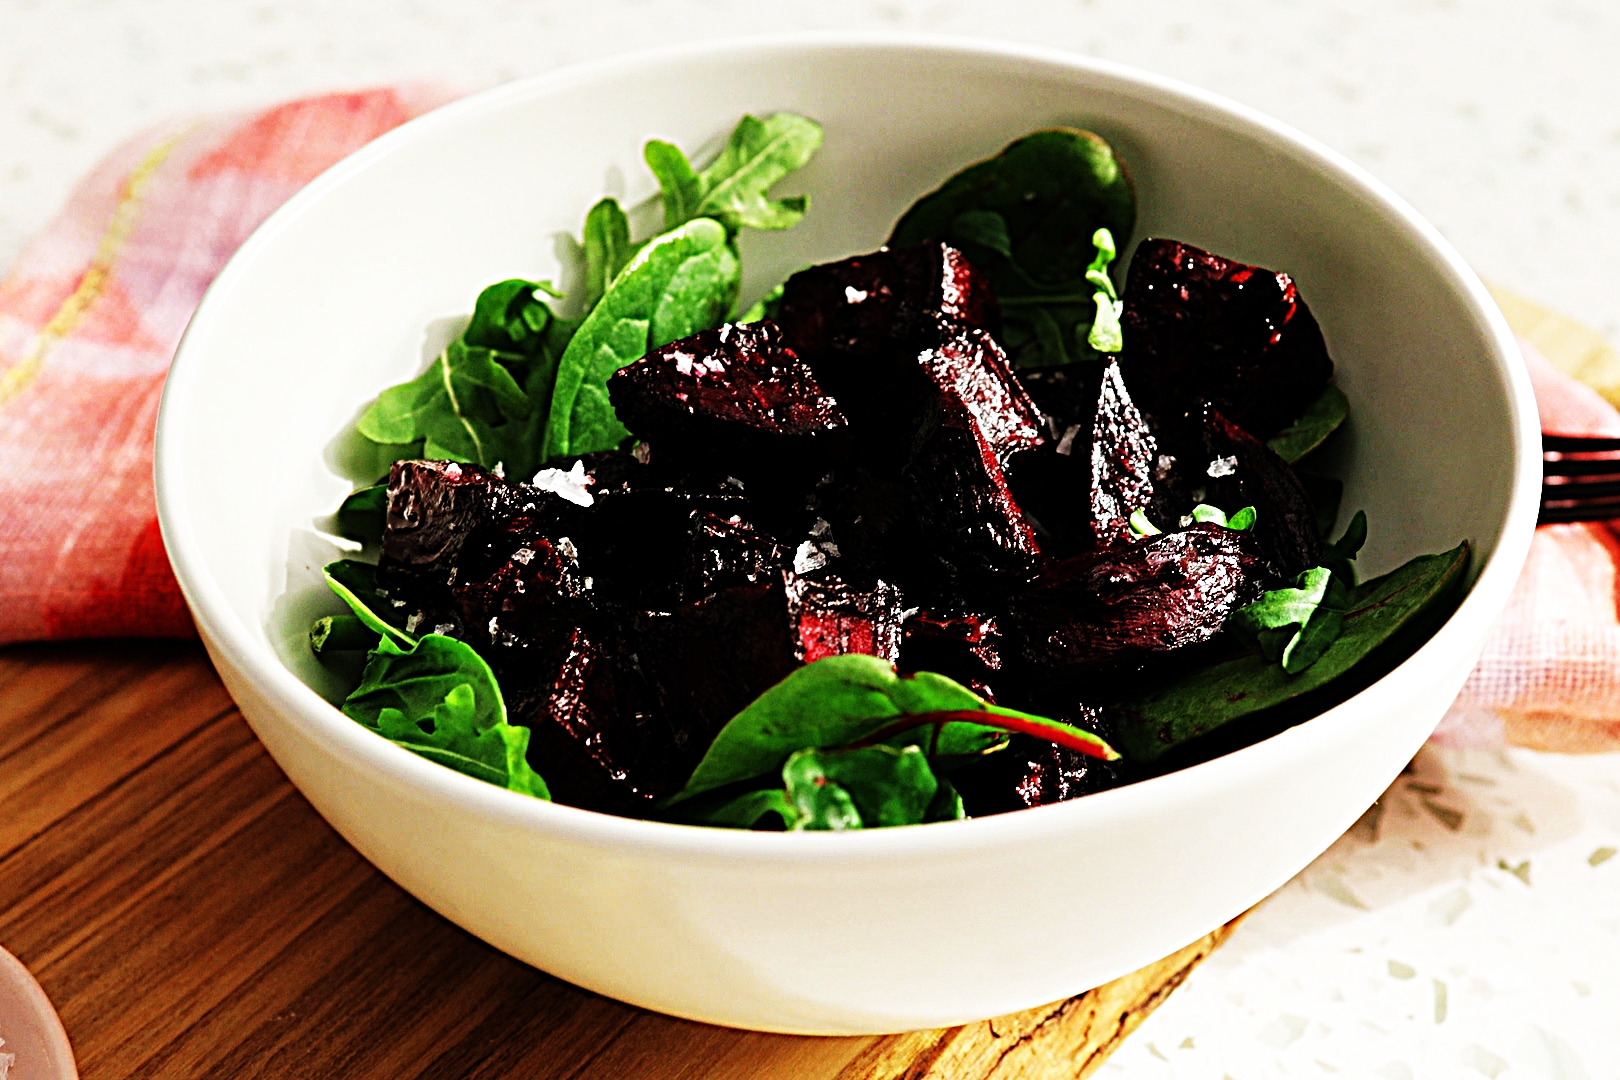 Stupid-Easy Recipe for Balsamic Roasted Beets (#1 Top-Rated)